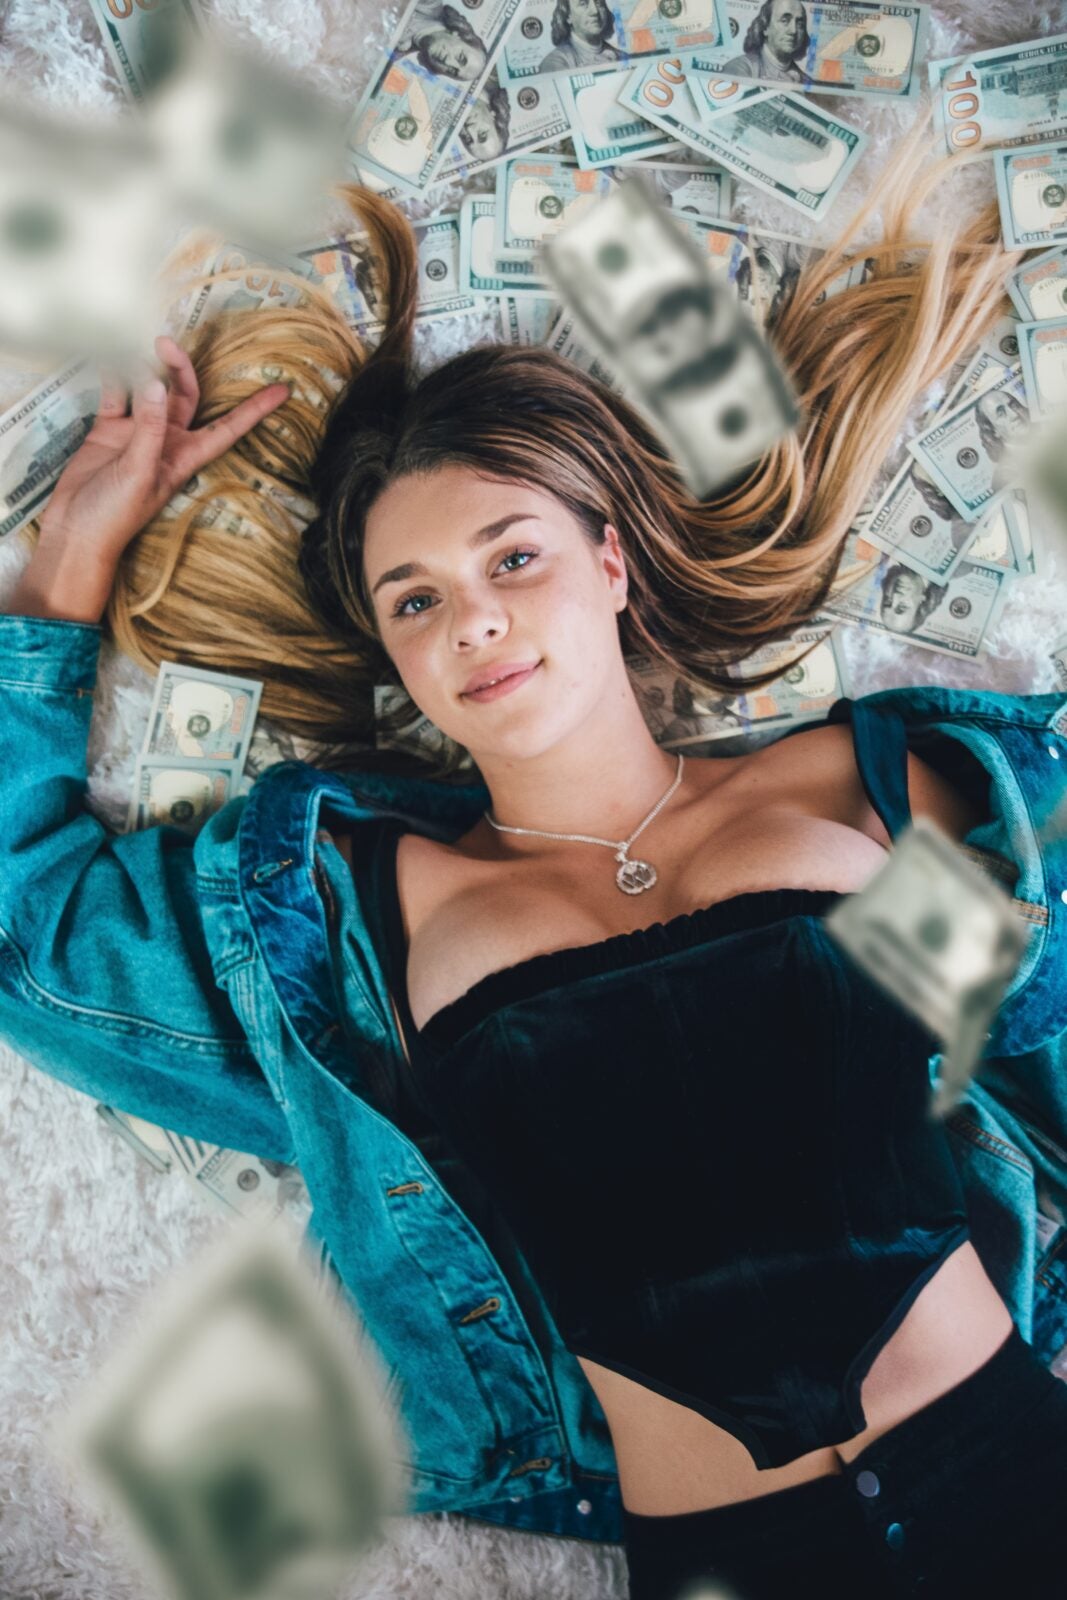 Young woman wearing a corset and jean jacket laying on top of a bed of money.